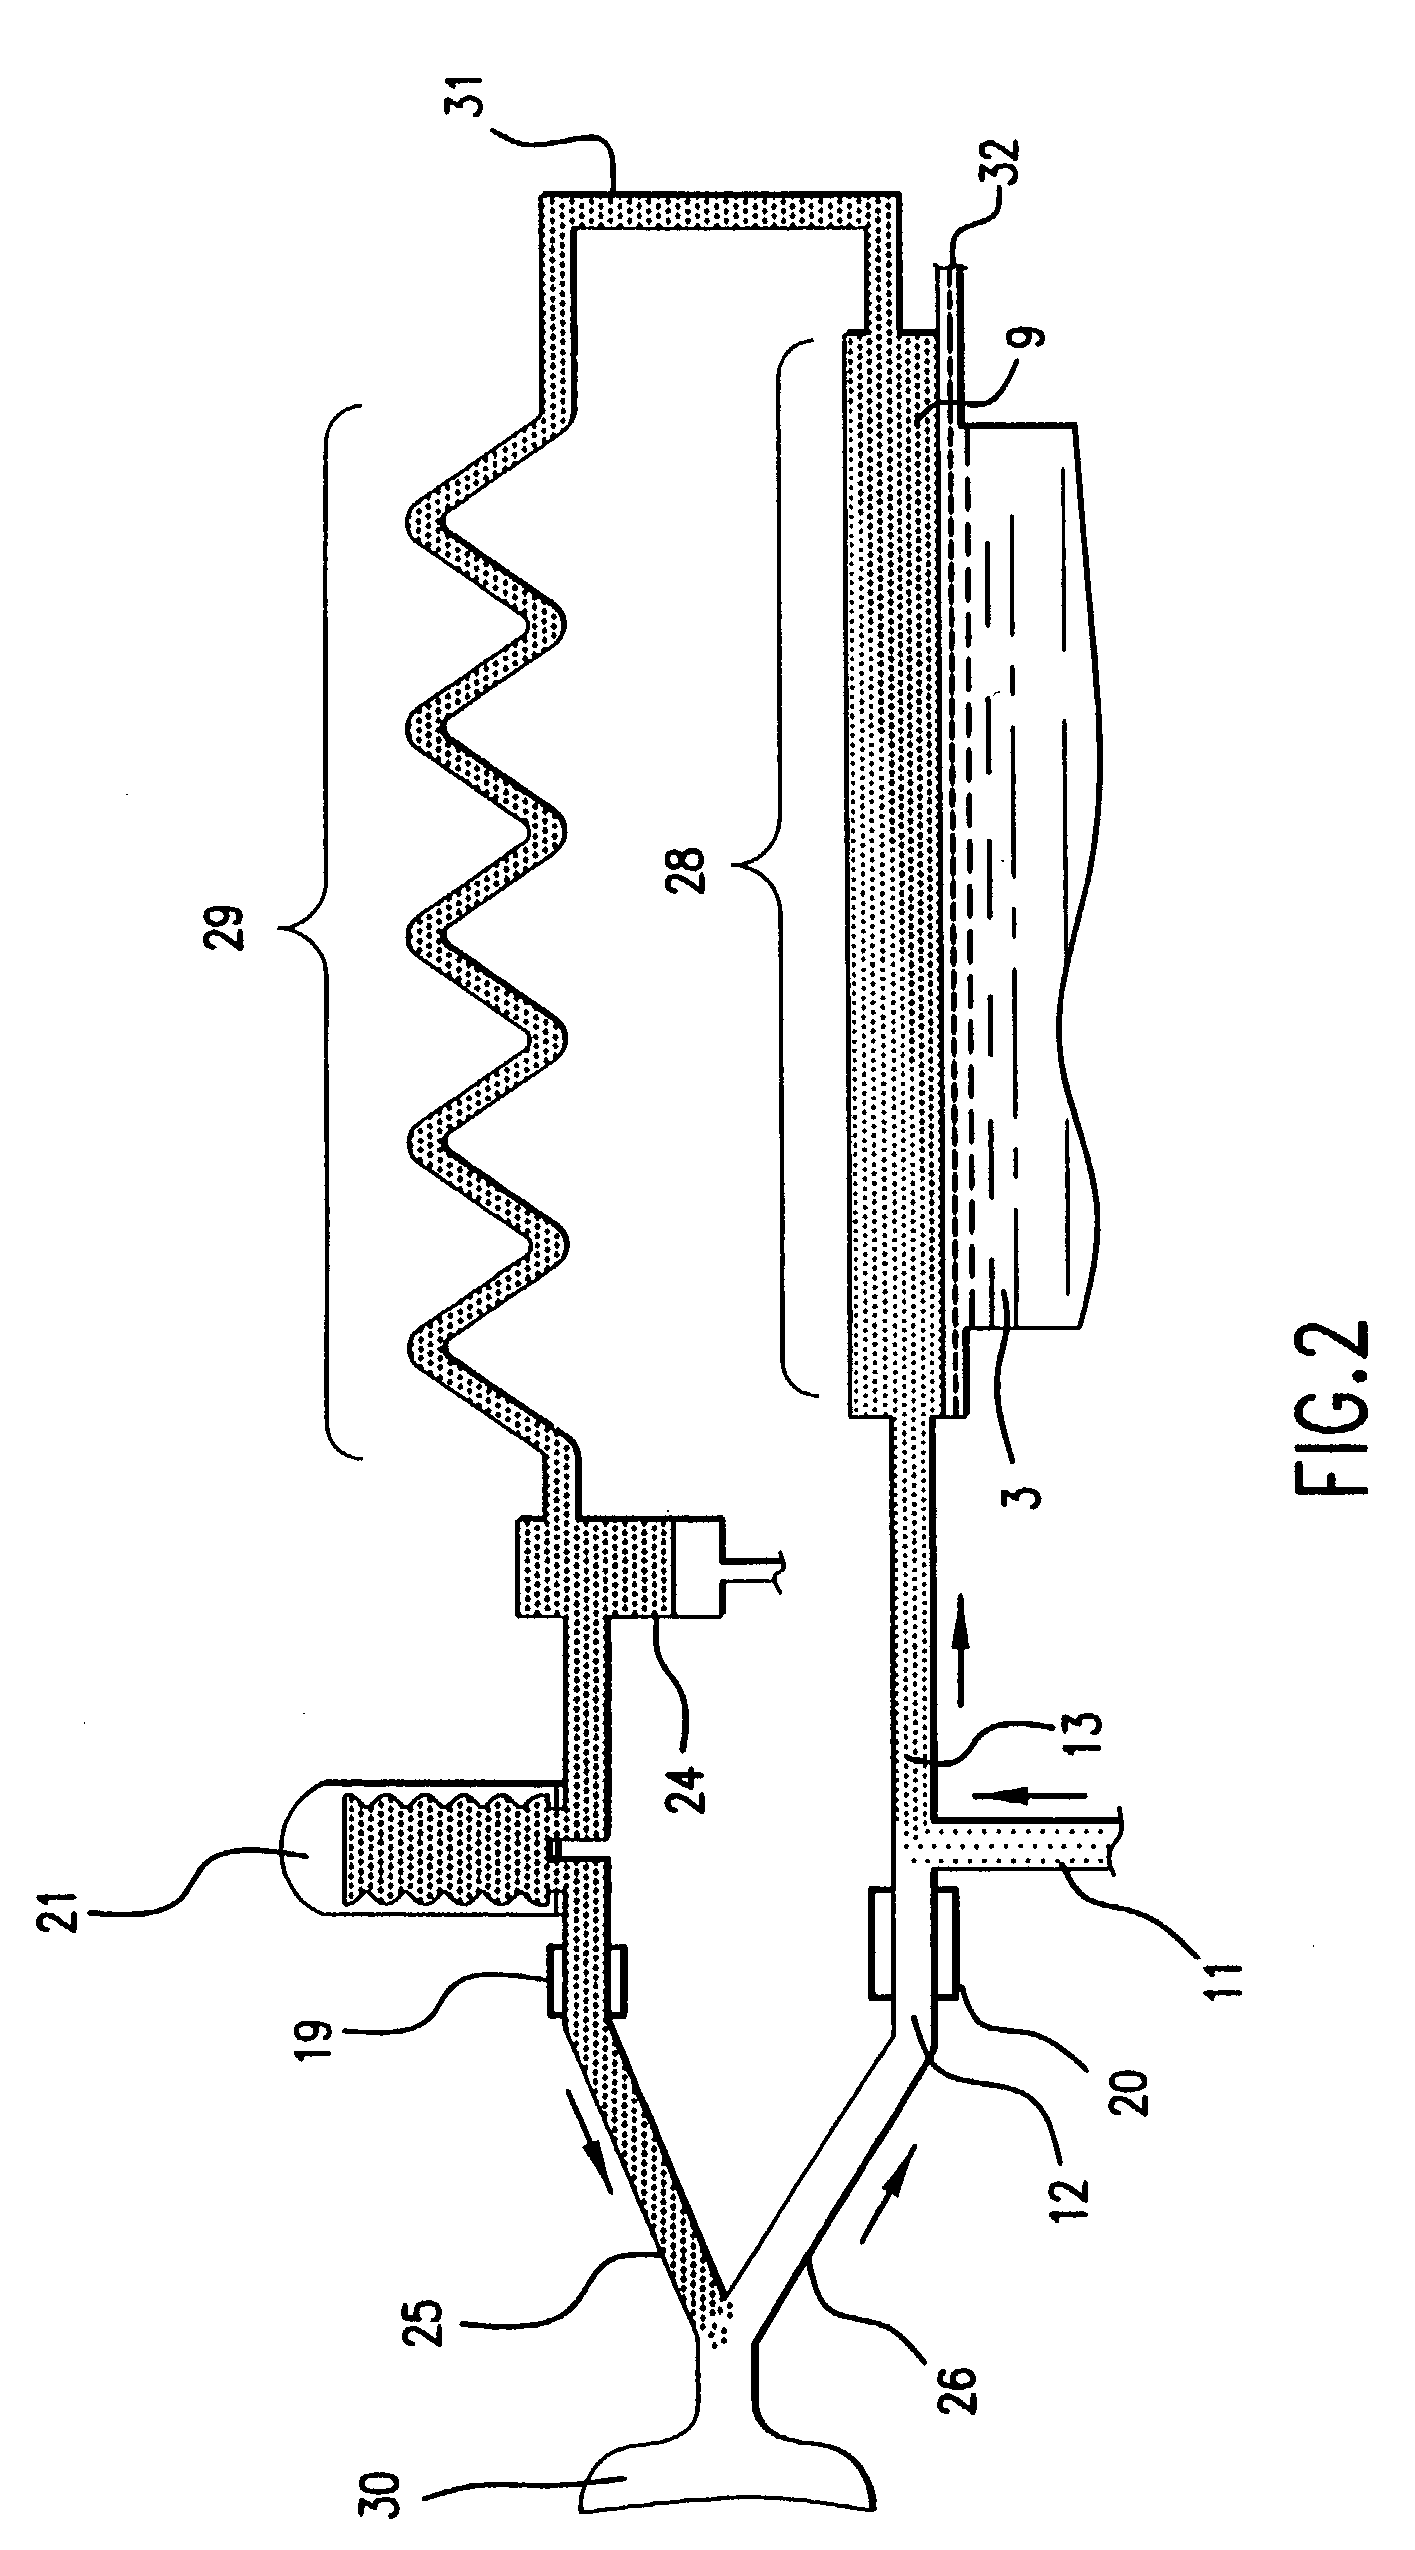 Method for altering the body temperature of a patient using a nebulized mist